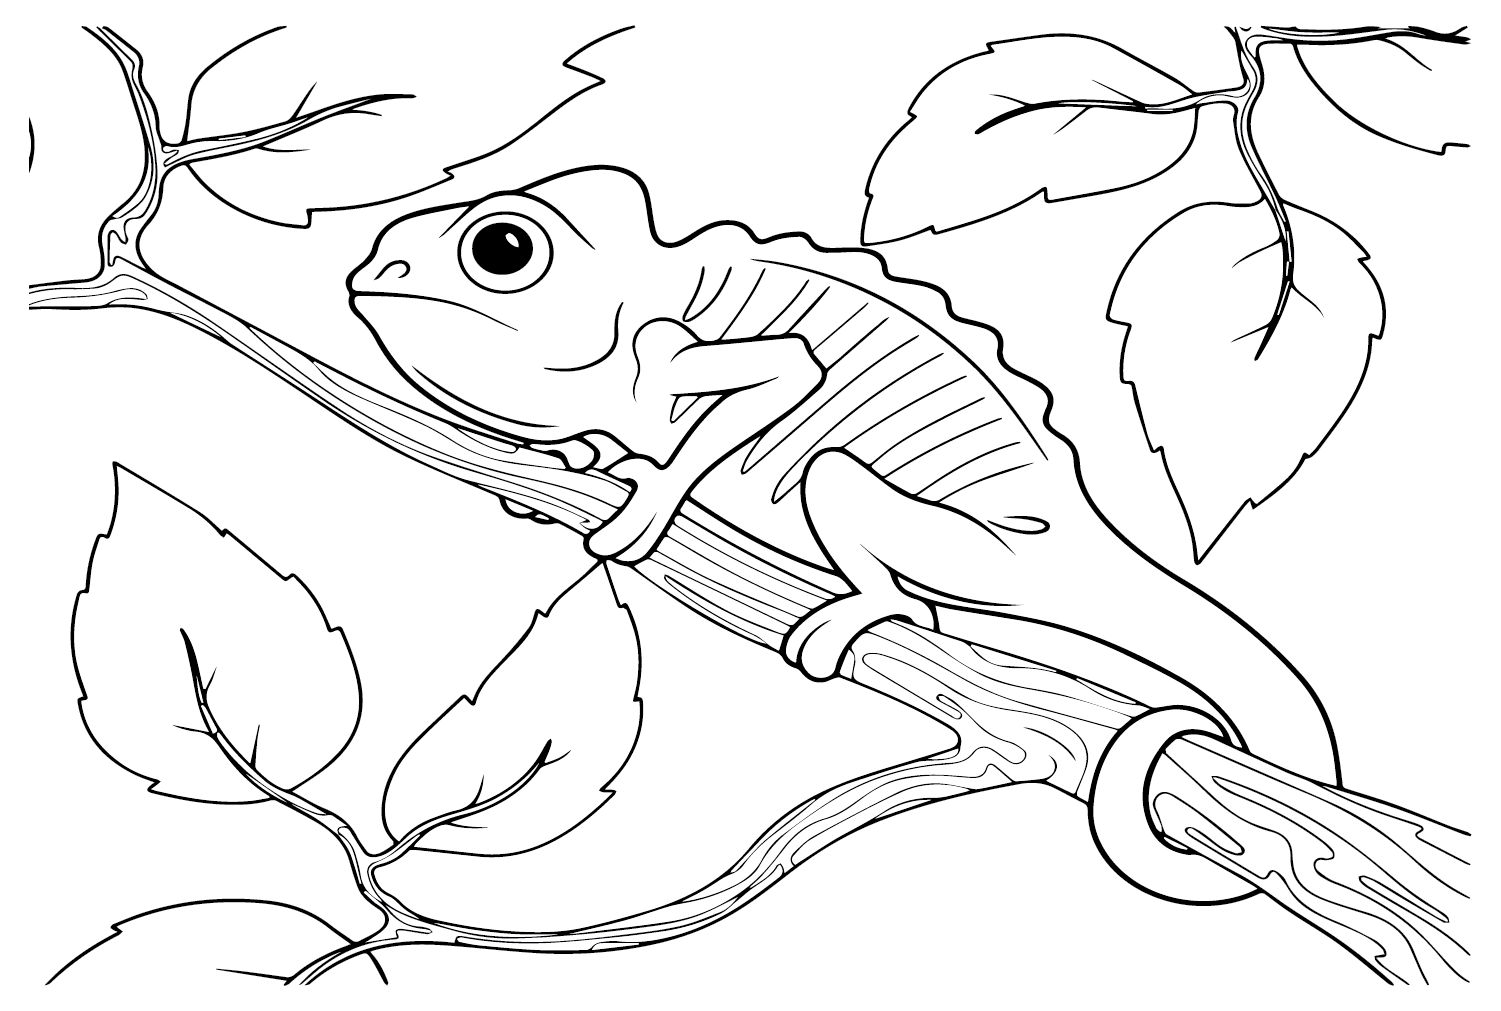 Chameleon Coloring Pages - Coloring Pages For Kids And Adults